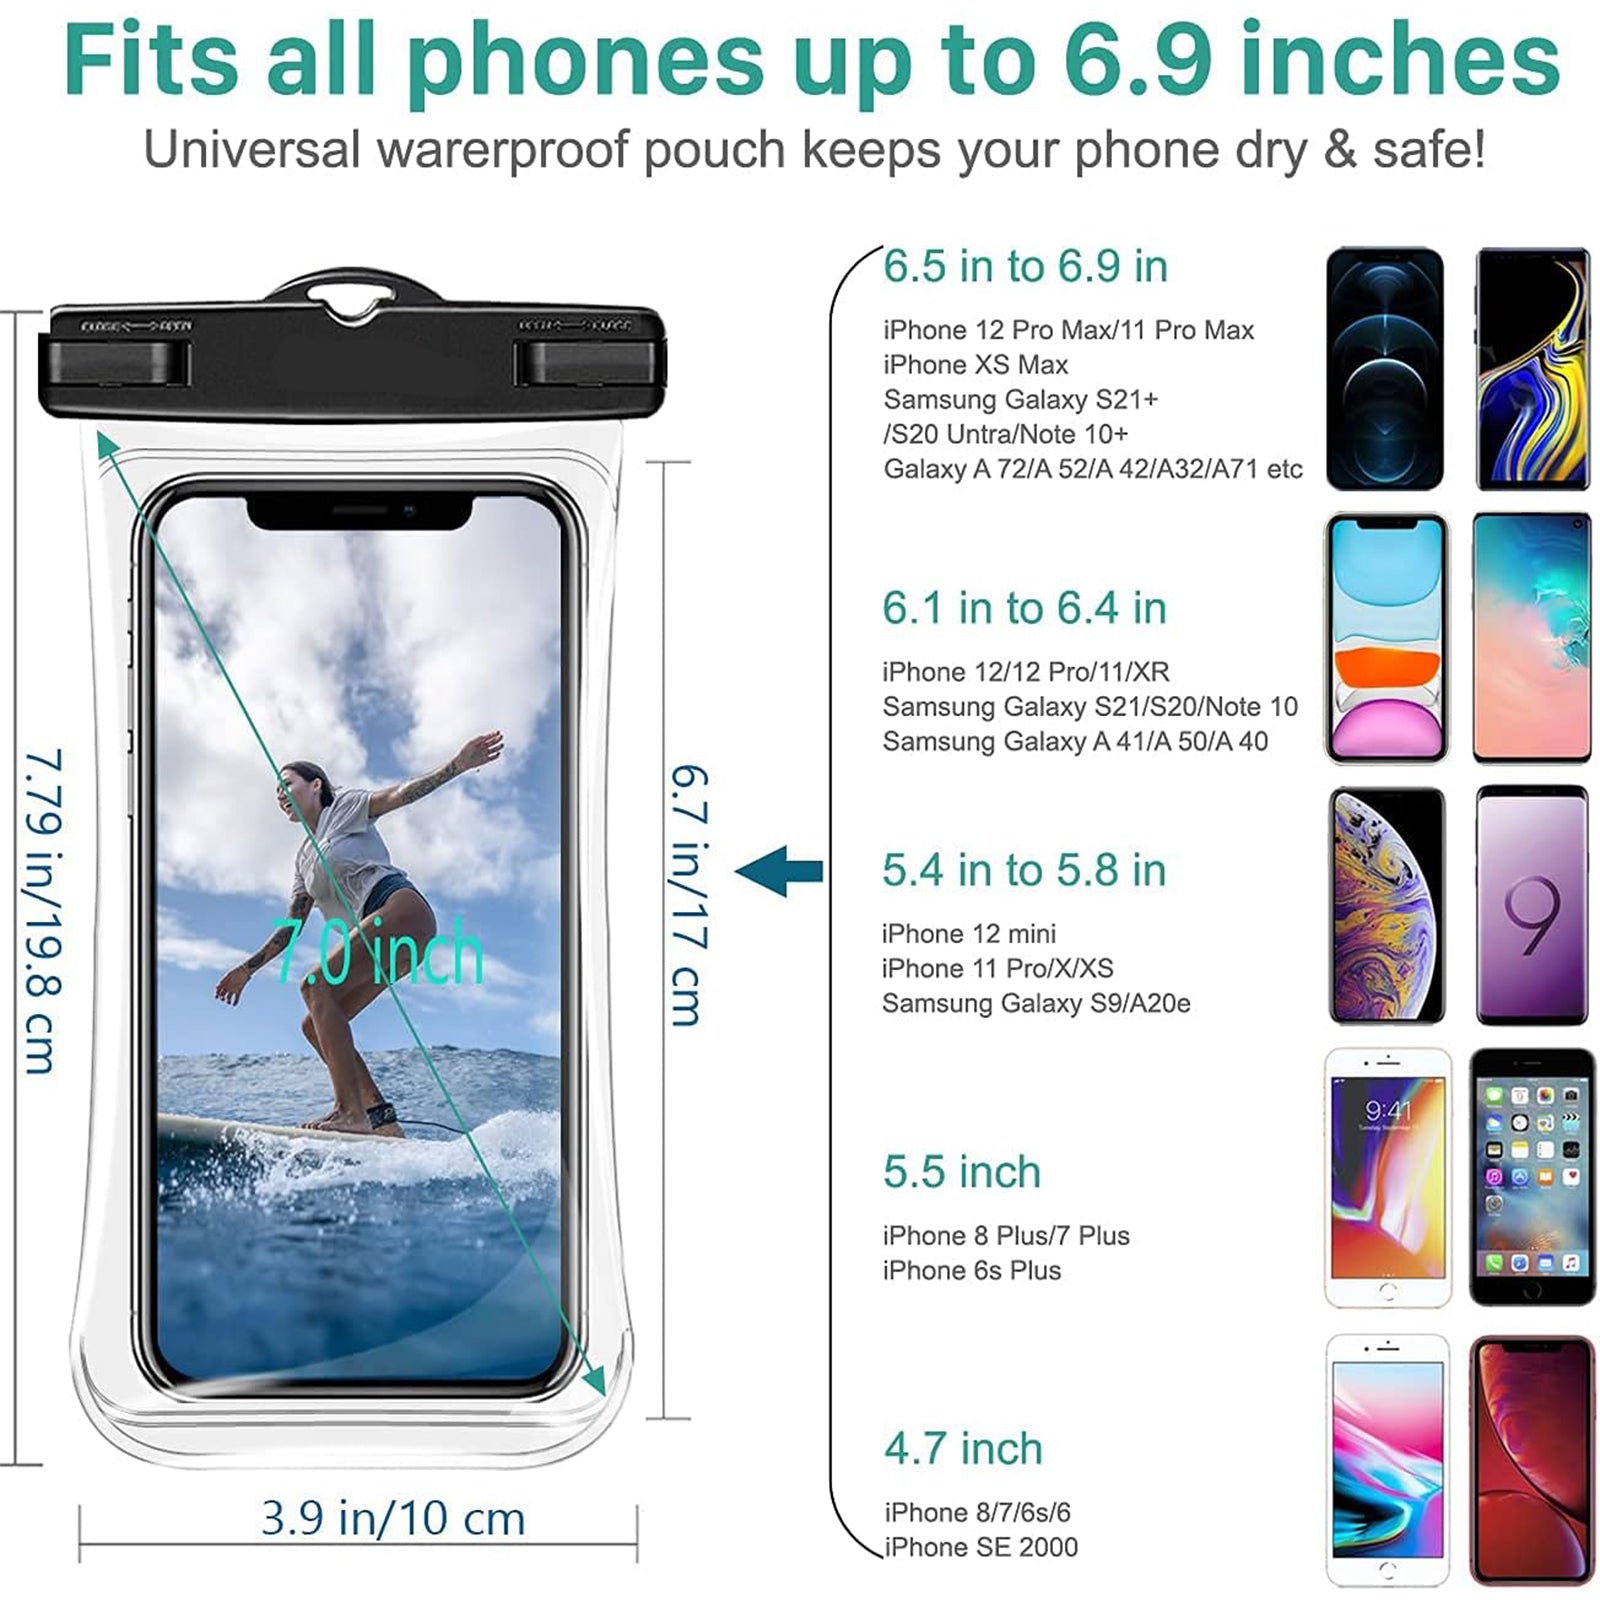 FozTech - Universal Waterproof Phone Pouch for Swimming, Dry Bag Lanyard Mobile Phone Case - Clear - WaterproofPouch - FozTech Official Store